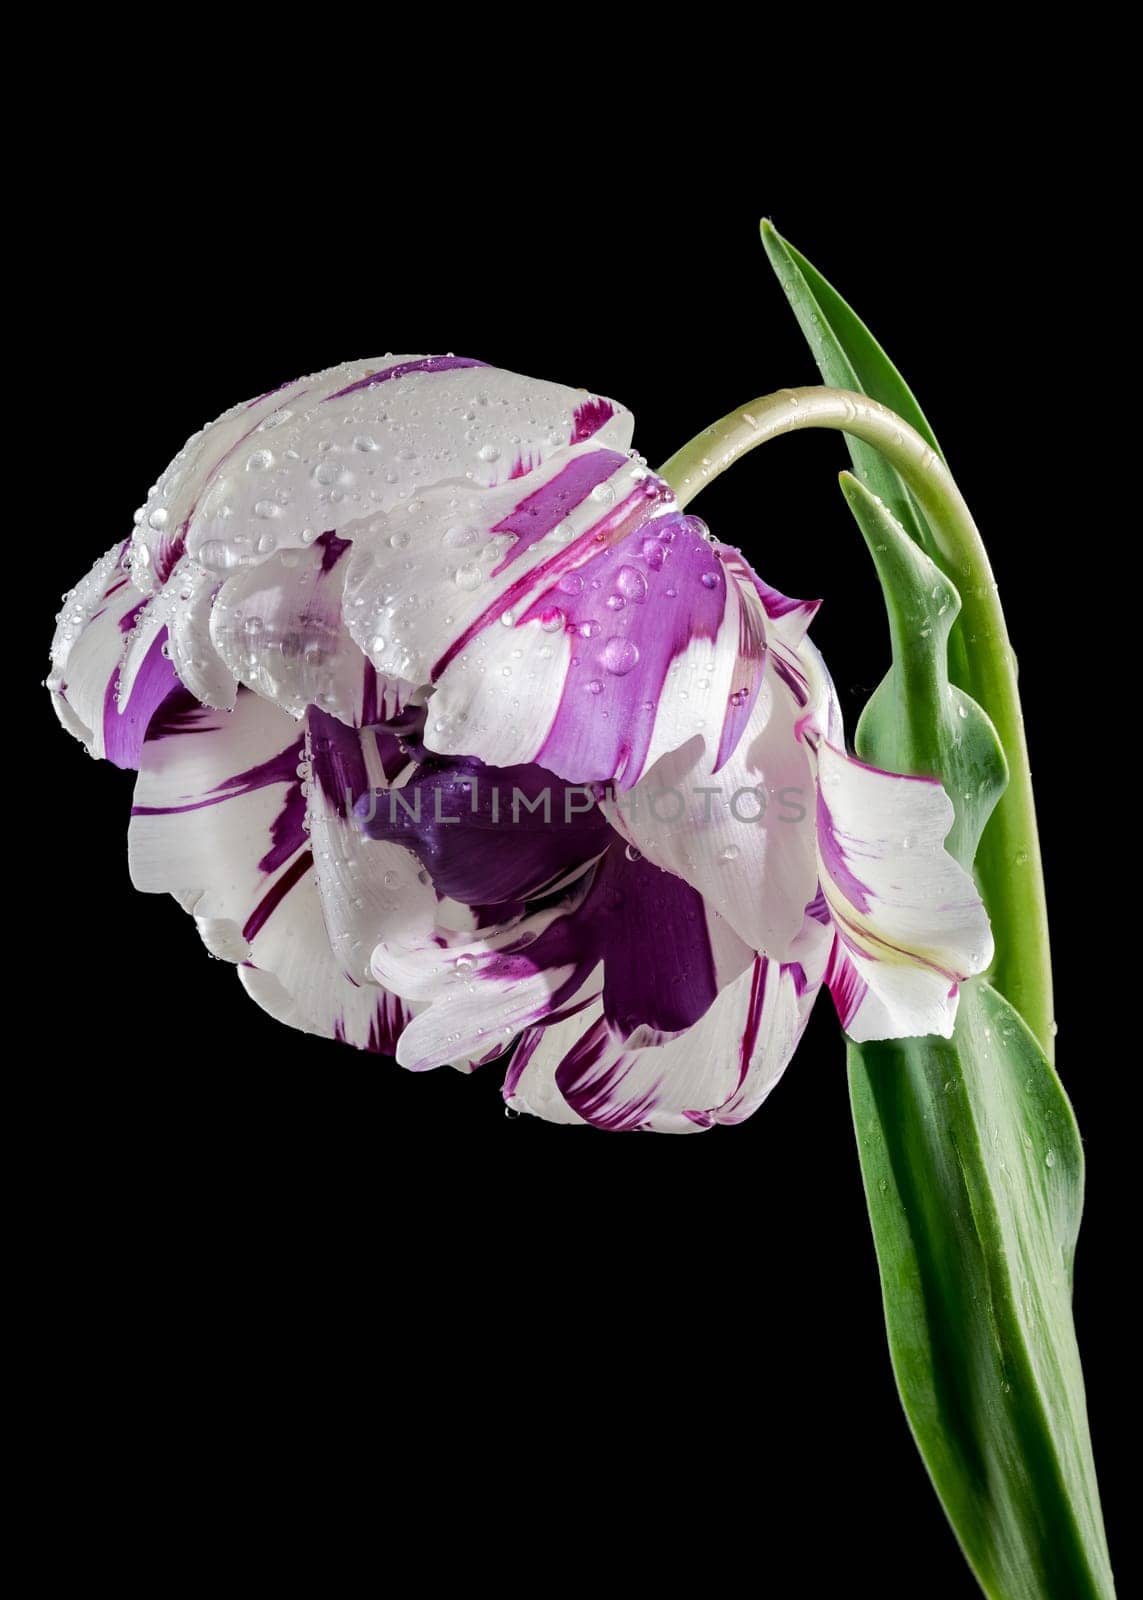 Blooming Tulip Jonquieres on a black background by Multipedia